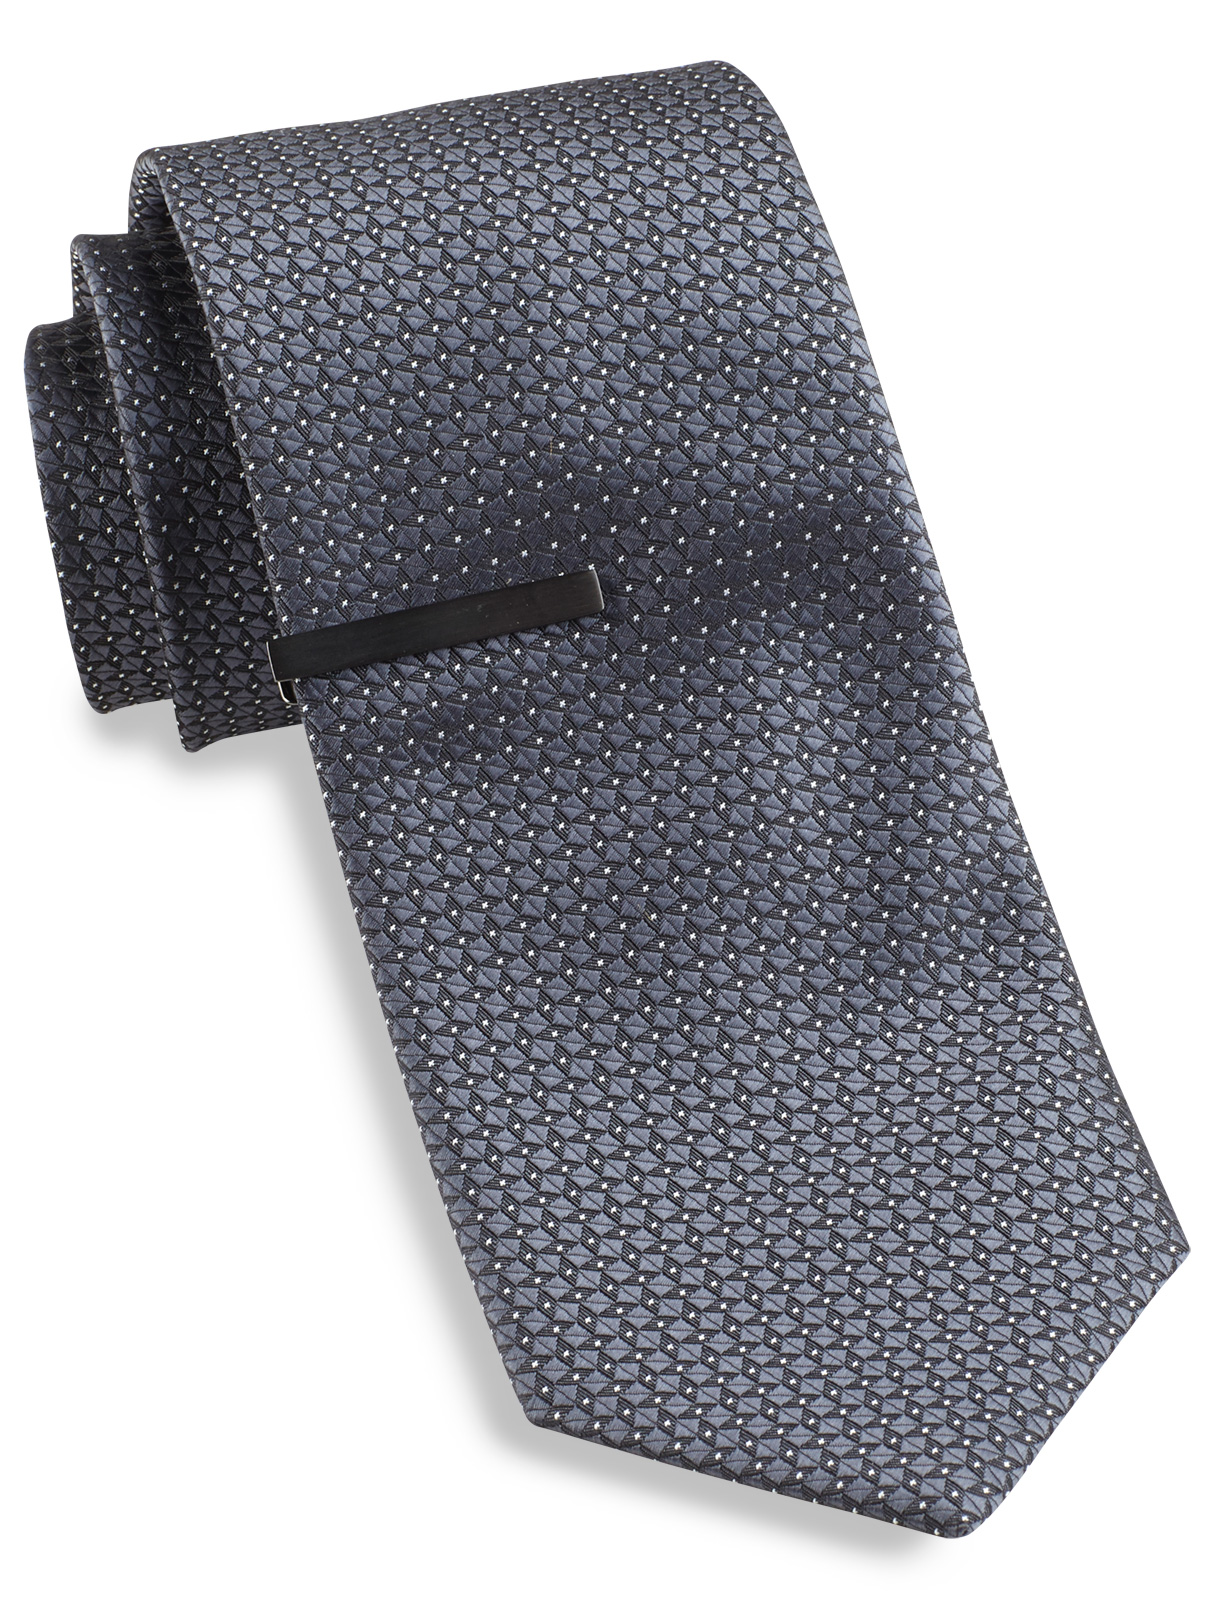 Gold Series Men's Big and TAll Diamond Solid Silk Tie with Tie Bar